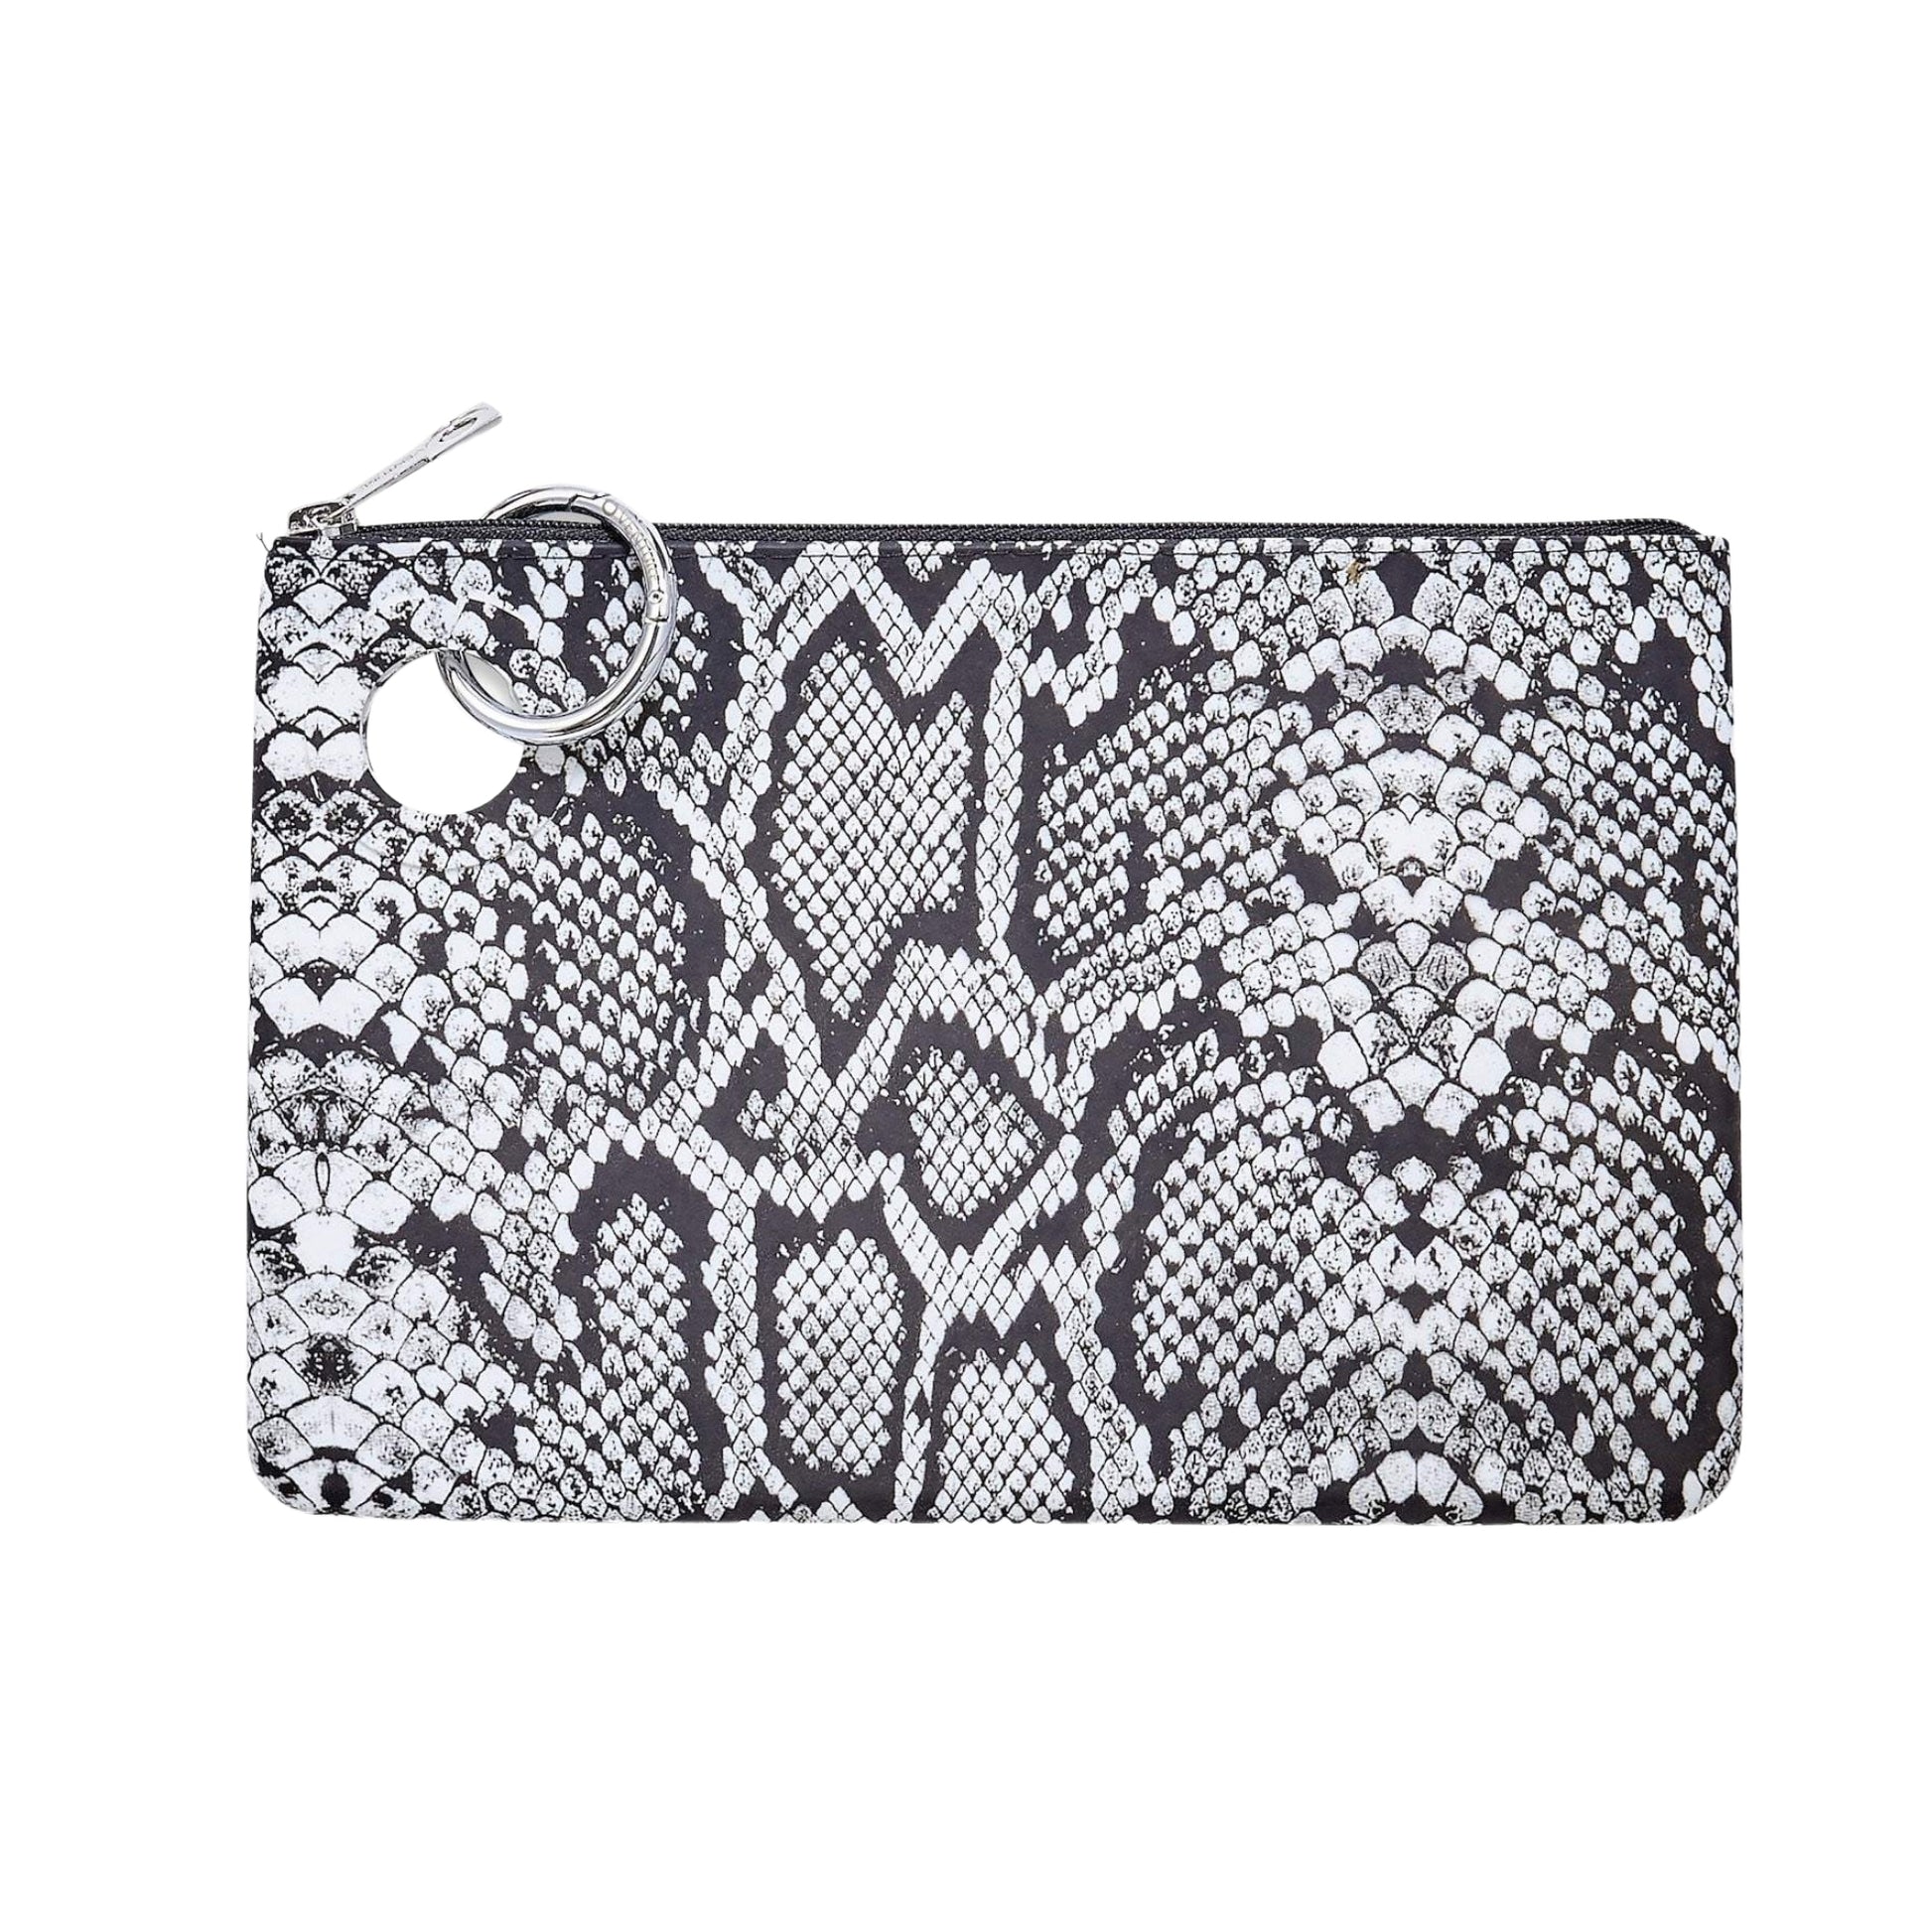 Oventure Large Silicone Pouch with black and white snakeskin print. and silver hardware